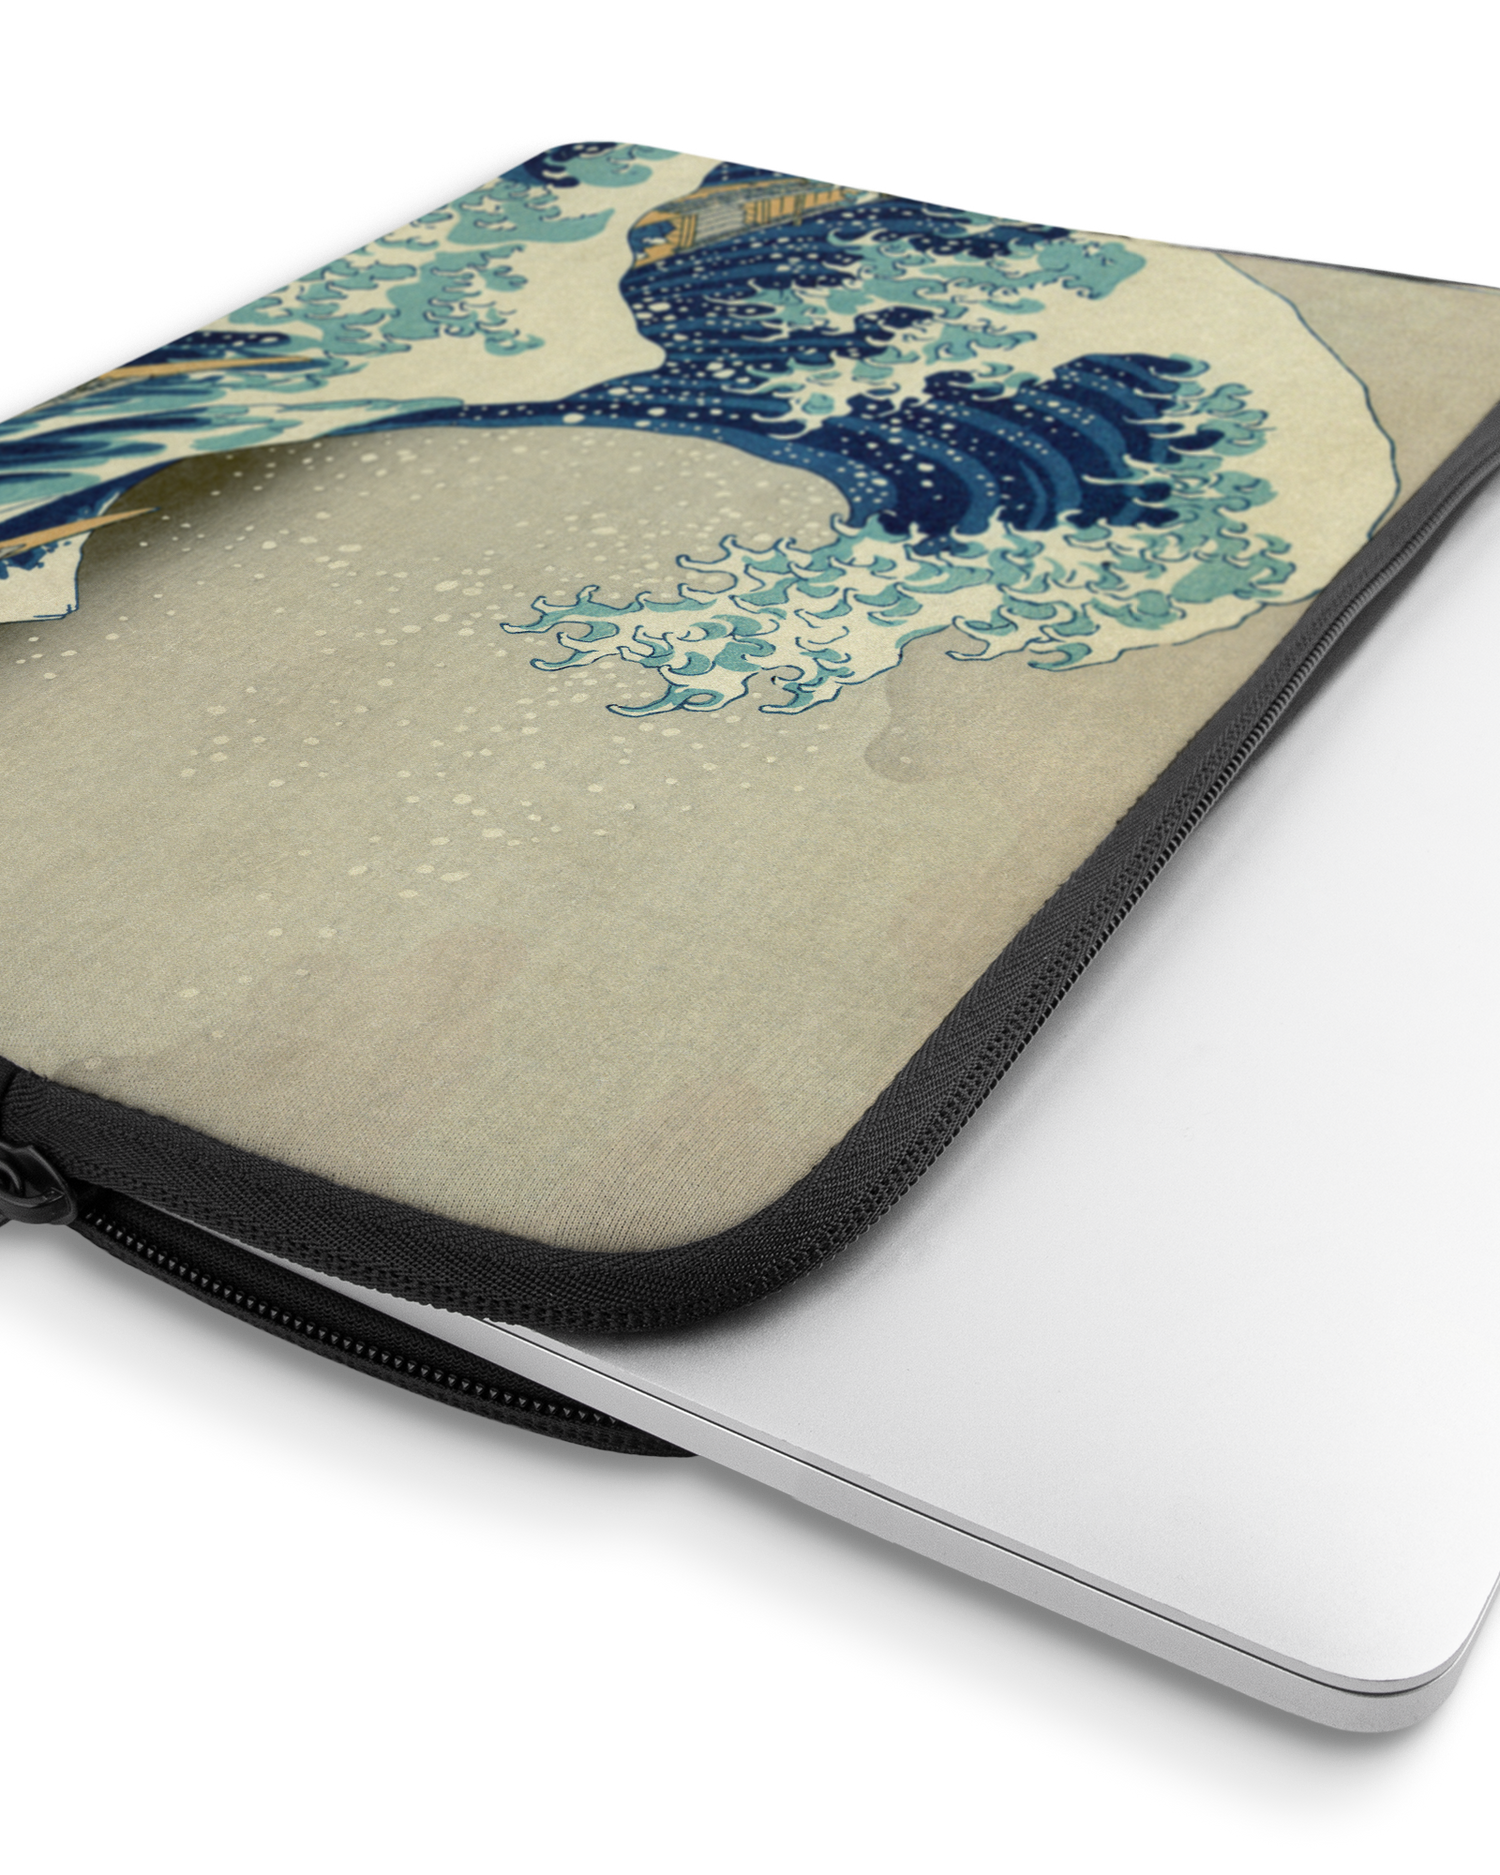 Great Wave Off Kanagawa By Hokusai Laptop Case 13 inch with device inside